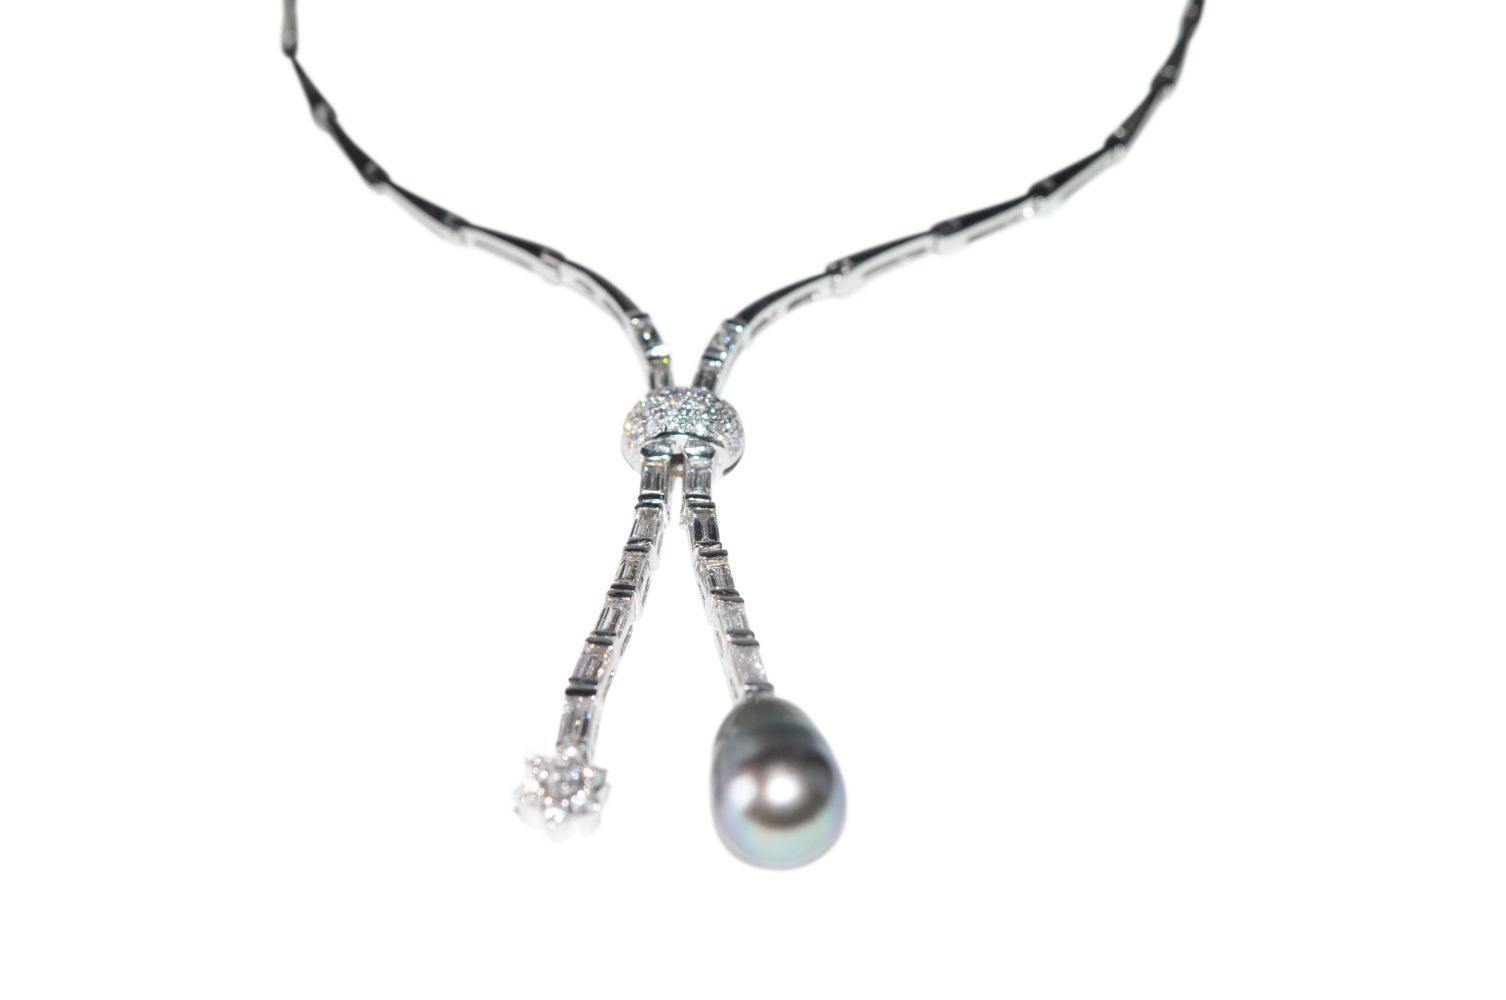 Diamond necklace18Kt white gold necklace with brillants and diamonds total carat weight approx. 1. - Image 3 of 3